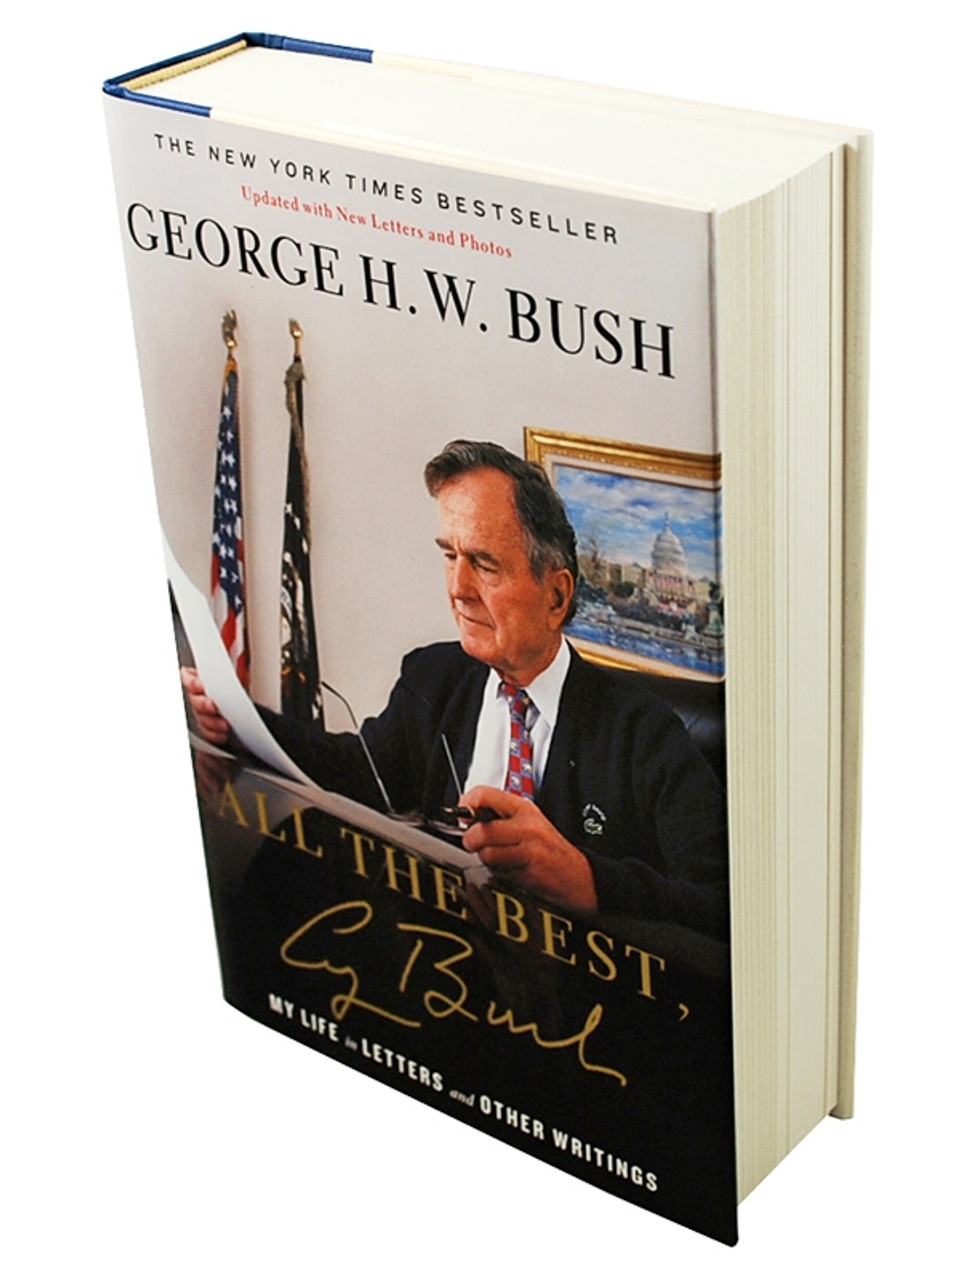 George HW Bush "All The Best, George Bush" Signed Limited Edition of only 1,000 with COA